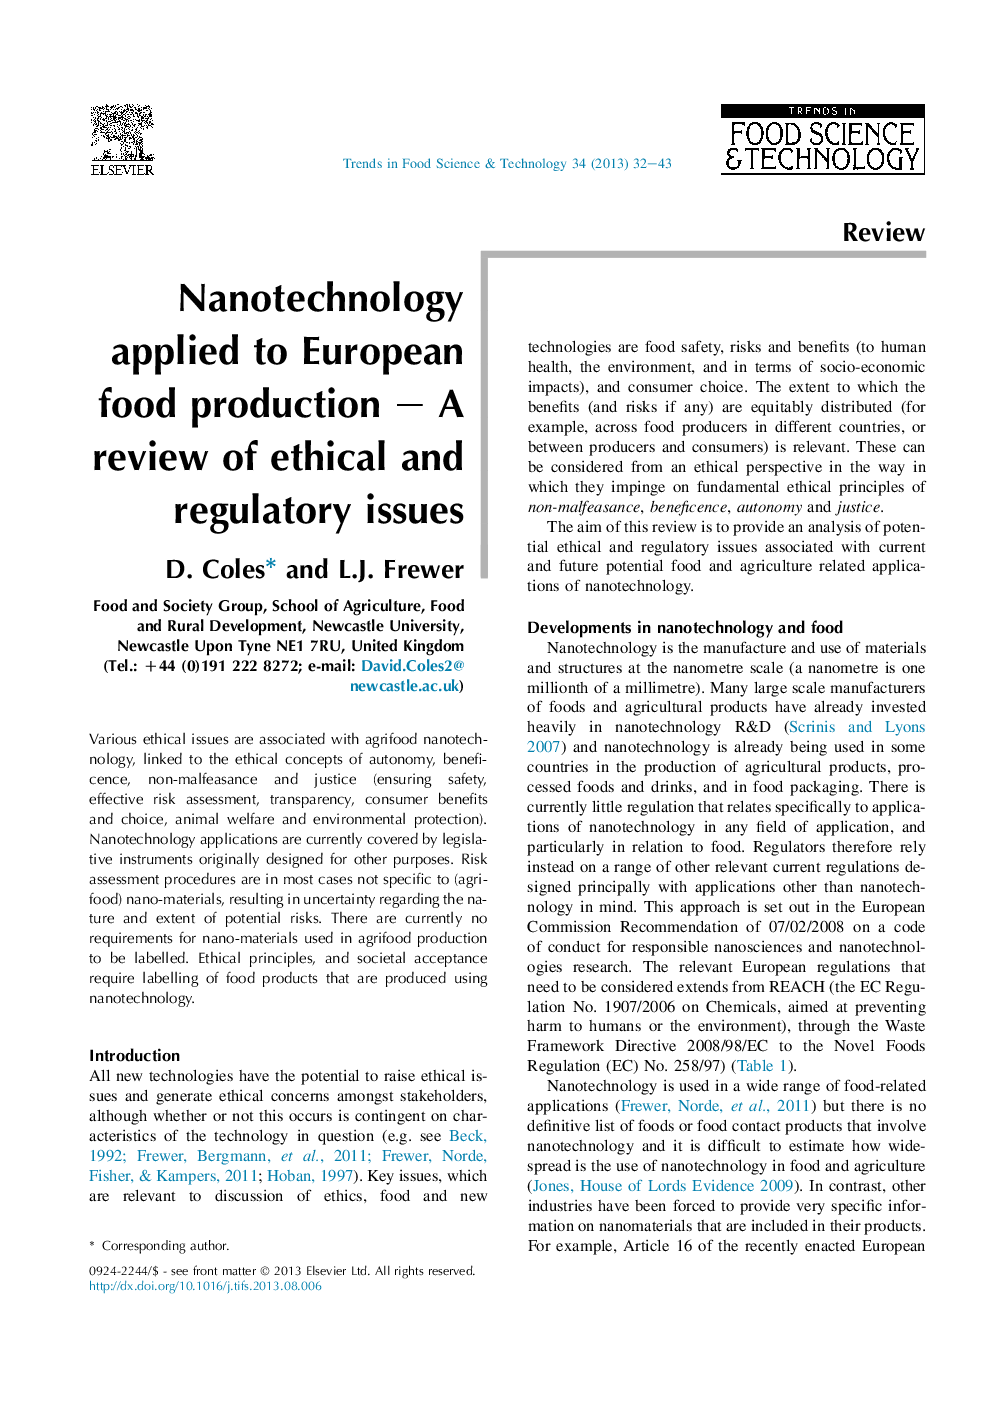 Nanotechnology applied to European food production – A review of ethical and regulatory issues